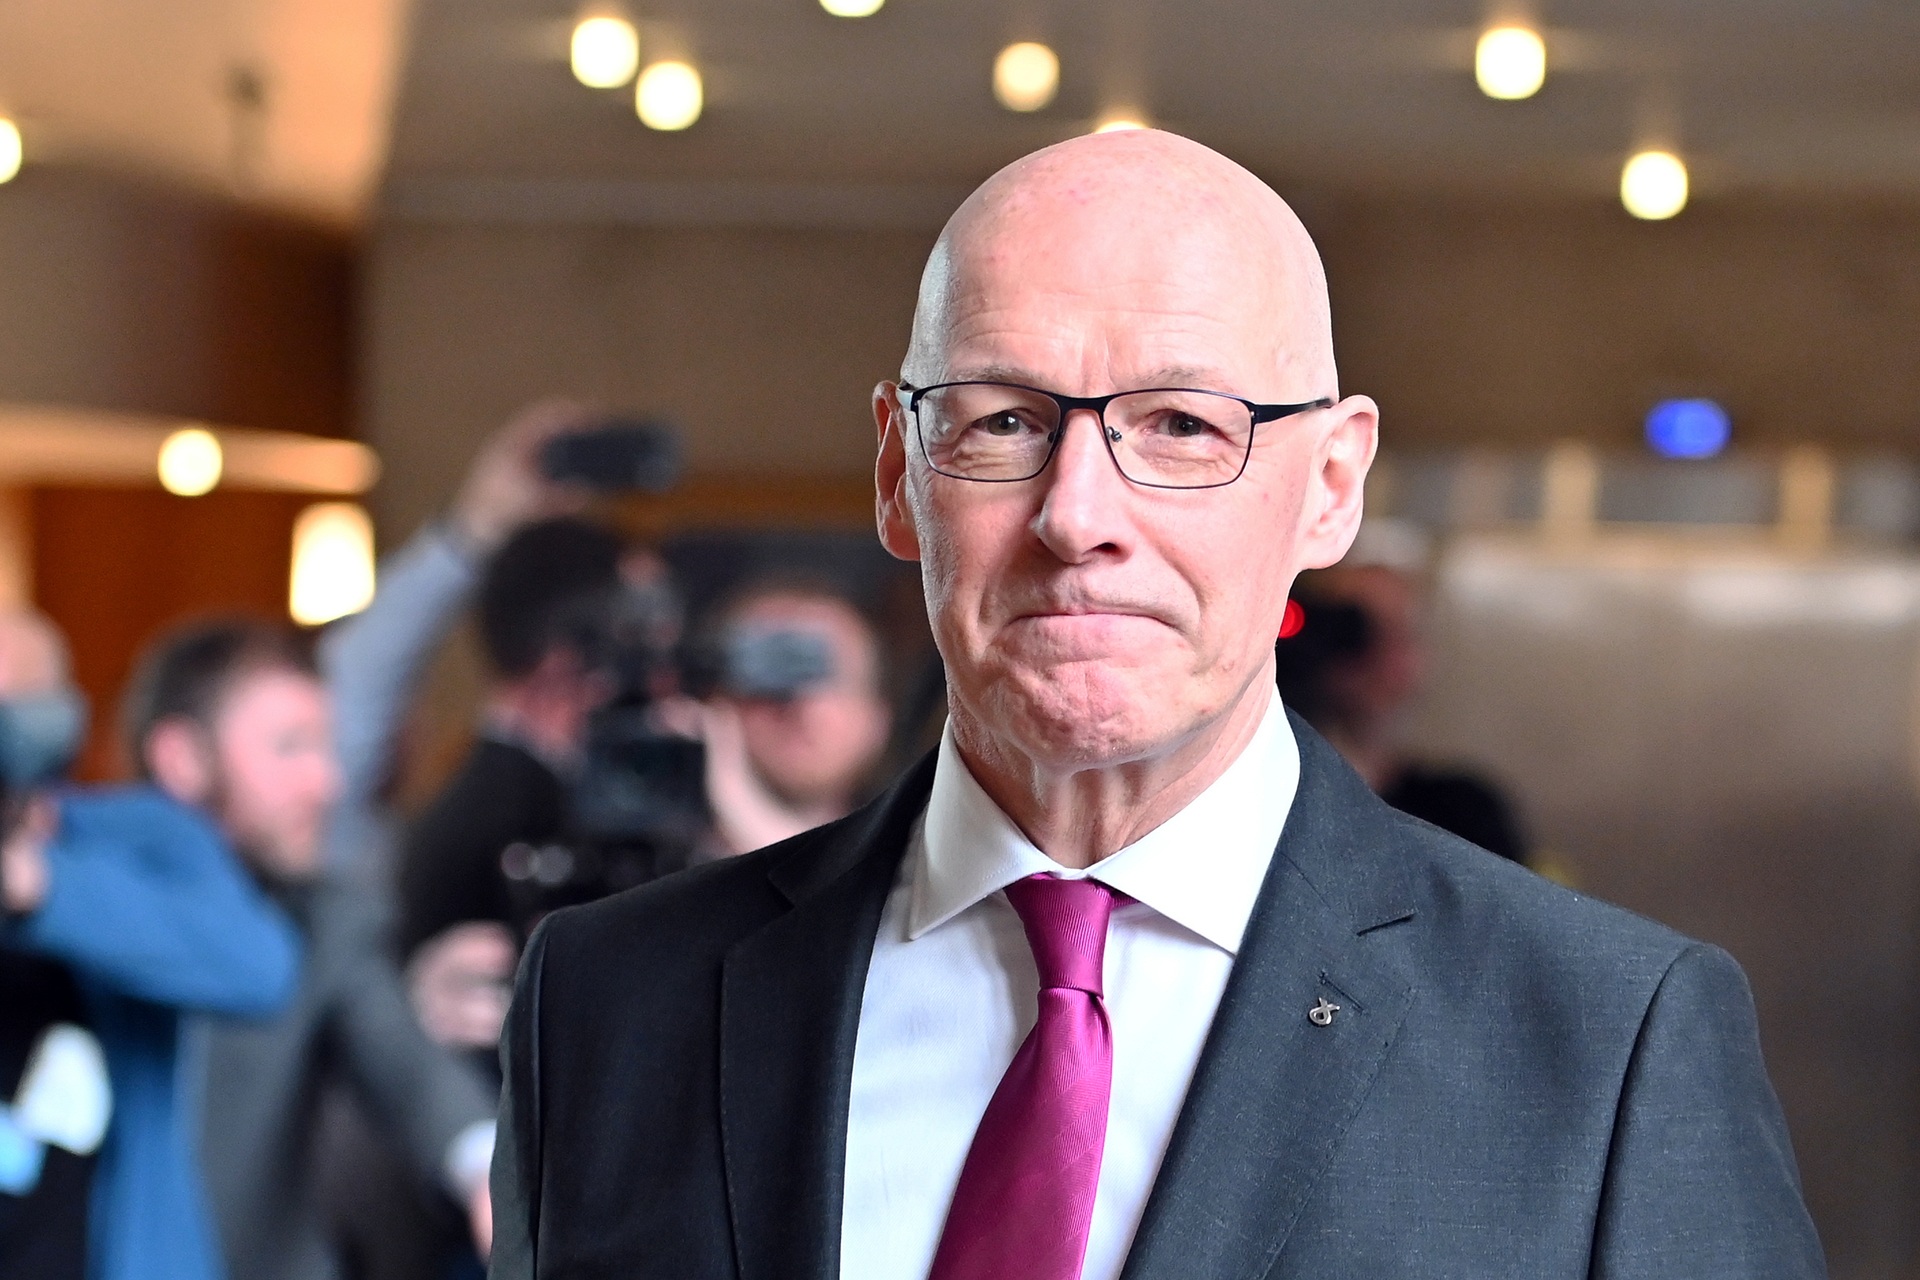 Scottish First Minister John Swinney criticised the timing of the UK general election, which coincides with most school holidays north of the border.